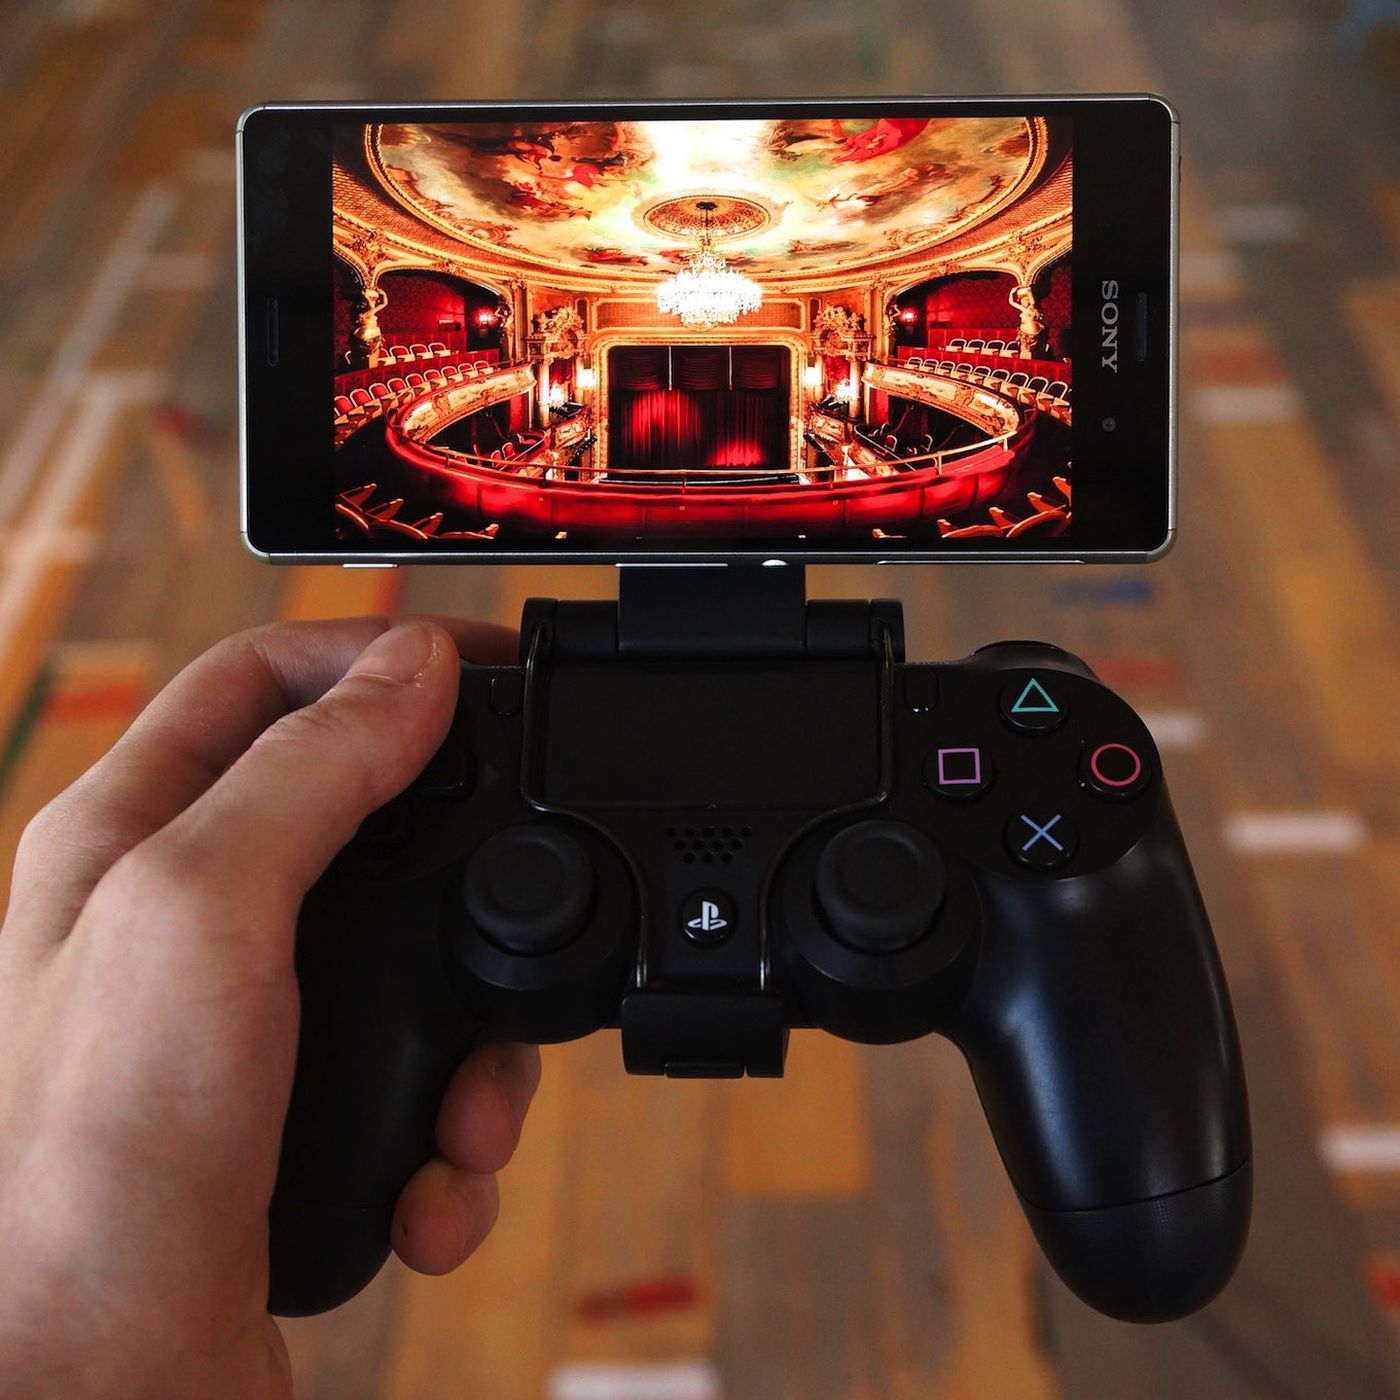 PS4 Remote Play On Xperia: Step-by-Step Instructions